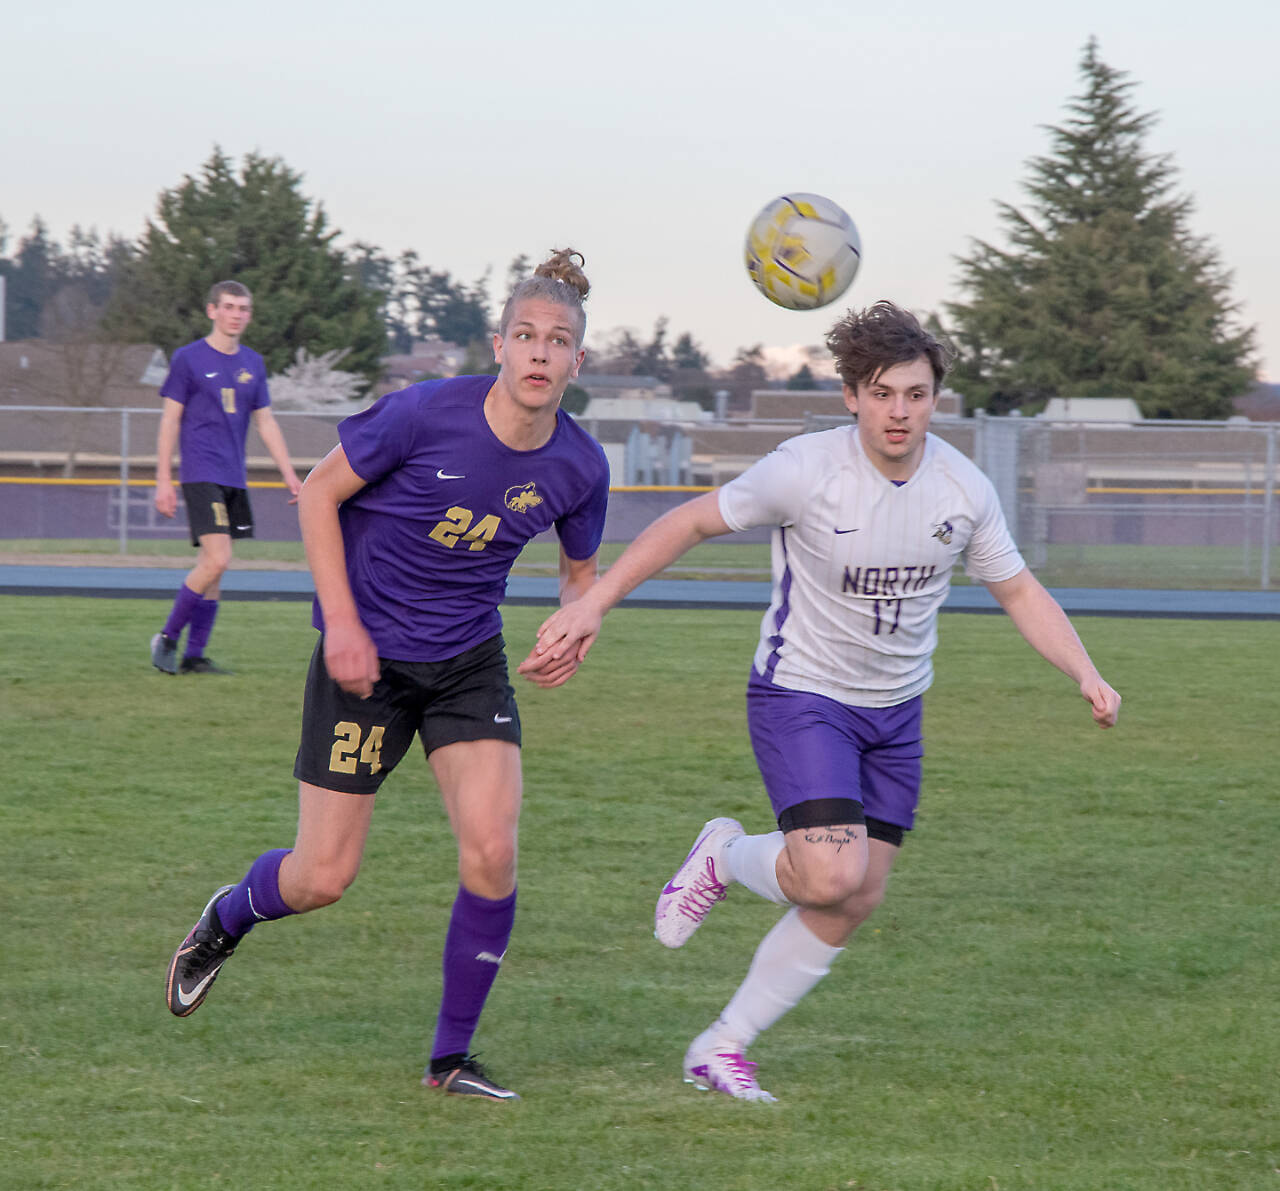 Sequim’s Jack Henninger (24) and North Kitsap’s Trevor Flowers (17) battle for a loose ball Tuesday in Sequim. (Emily Matthiesson/Olympic Peninsula News Group)